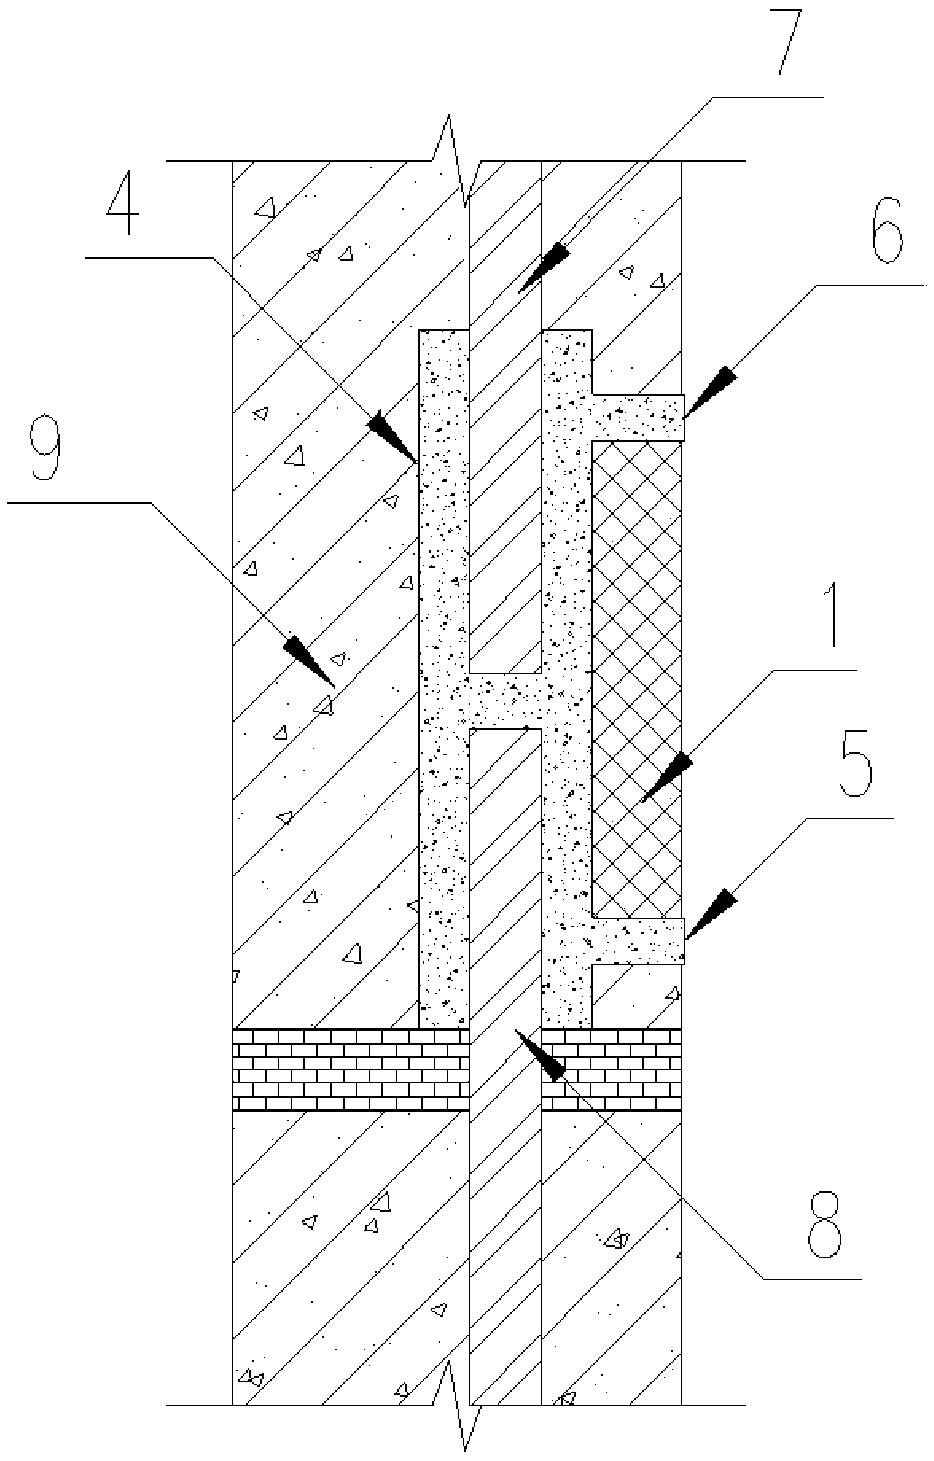 Grouting fullness detection method and system based on sleeve surface ultrasonic